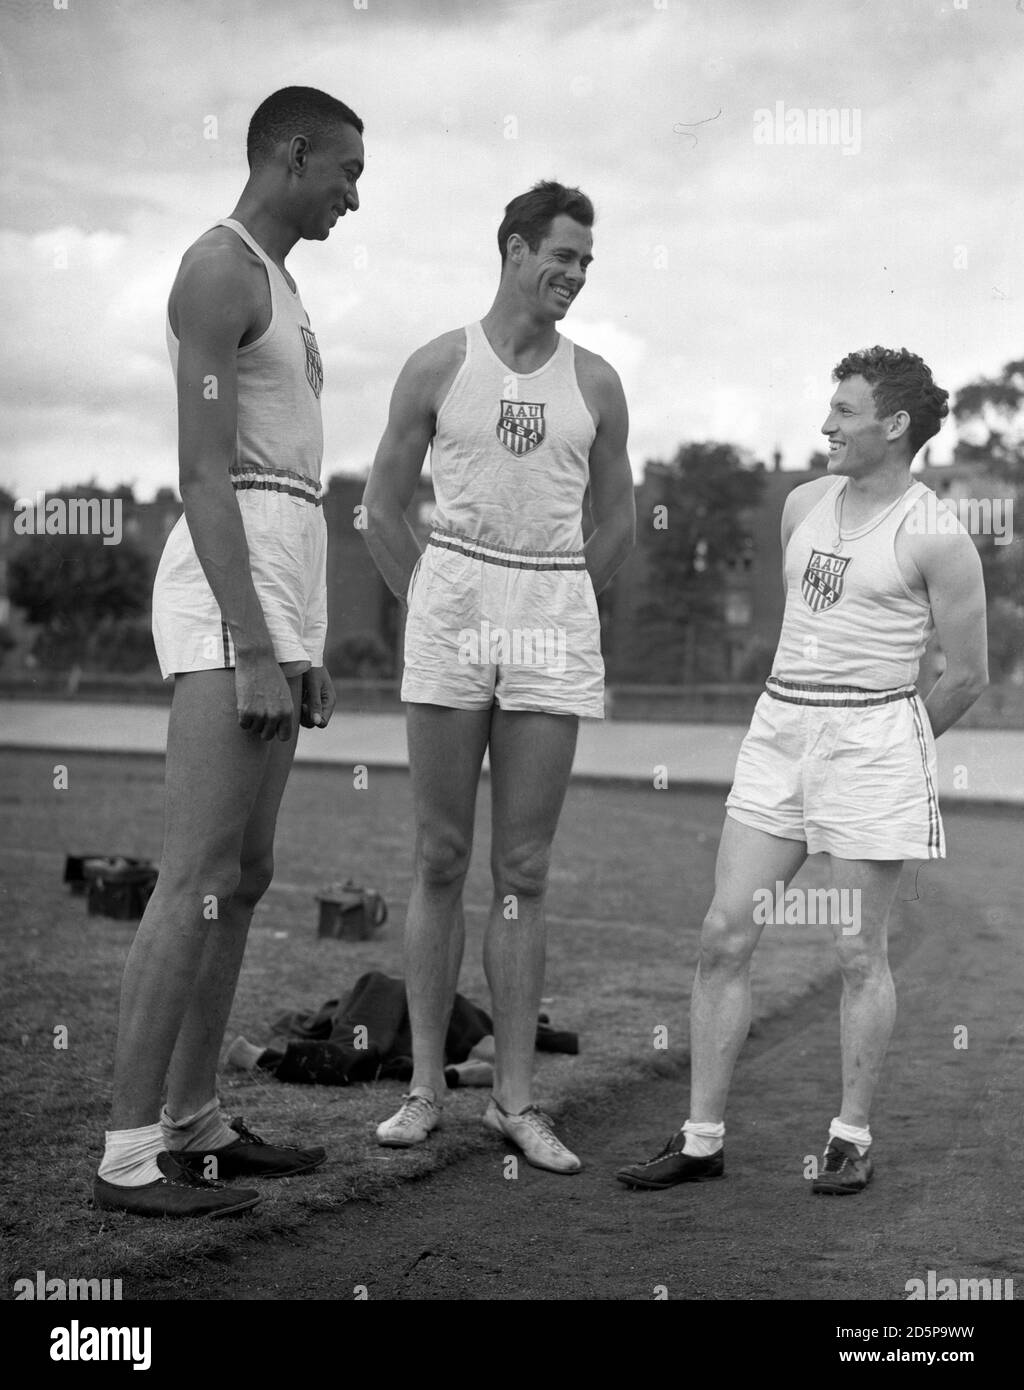 The tallest members of the American team - Melvin Walker, the high jumper, is 6 feet 4 inches, and Perrin Walker, sprinter, who is 6 feet 5 inches, with Greg Rice, 5,000 metres competitor, who is only 5 feet 4 inches. Stock Photo